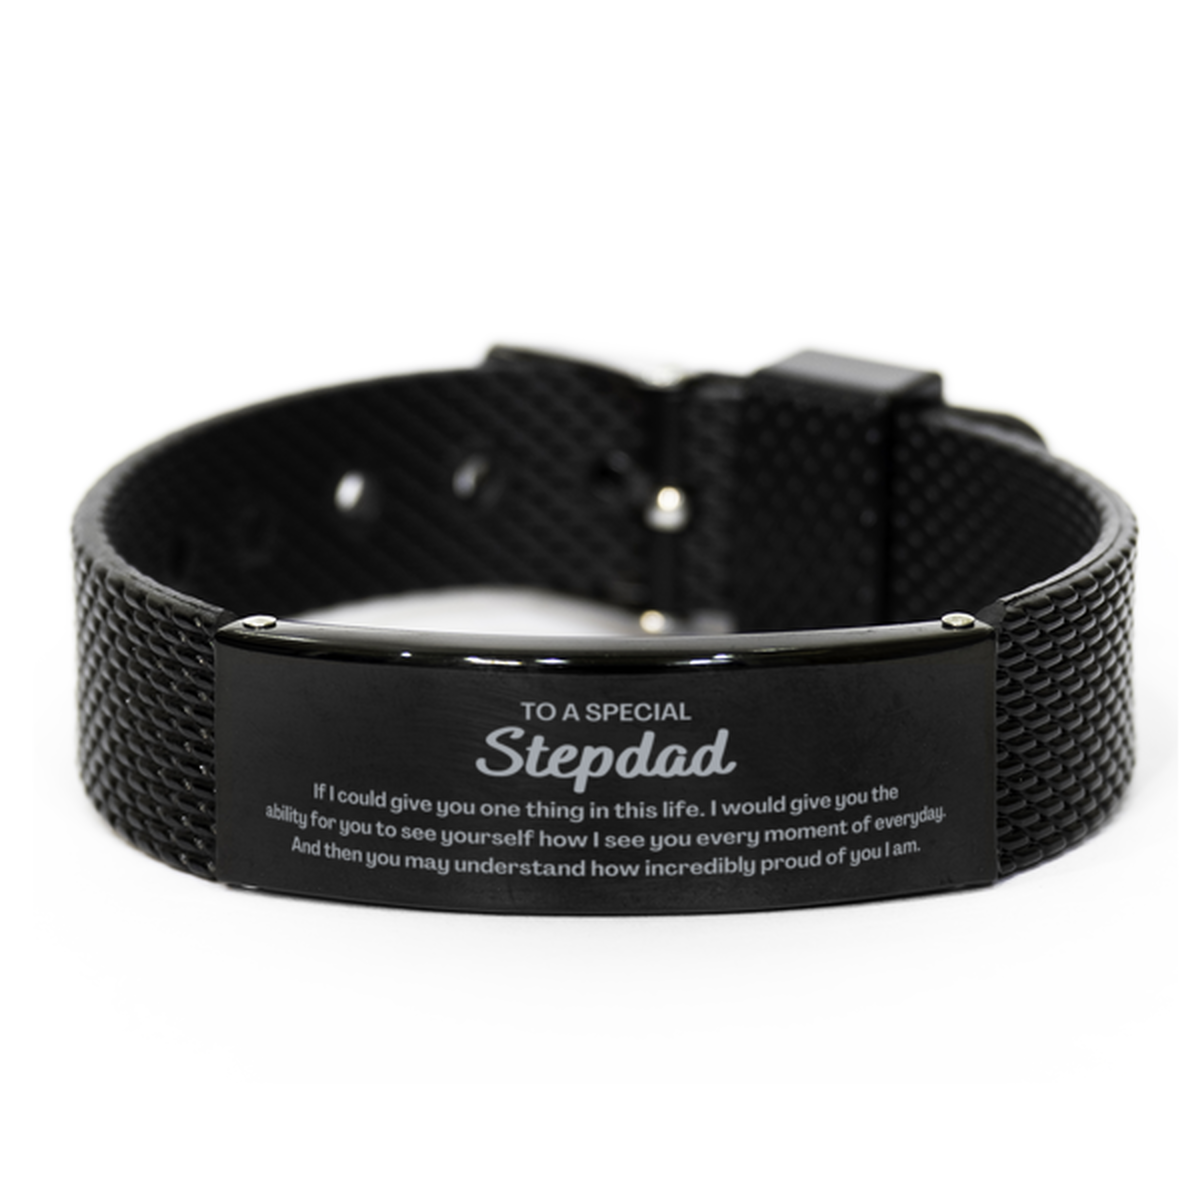 To My Stepdad Black Shark Mesh Bracelet, Gifts For Stepdad Engraved, Inspirational Gifts for Christmas Birthday, Epic Gifts for Stepdad To A Special Stepdad how incredibly proud of you I am